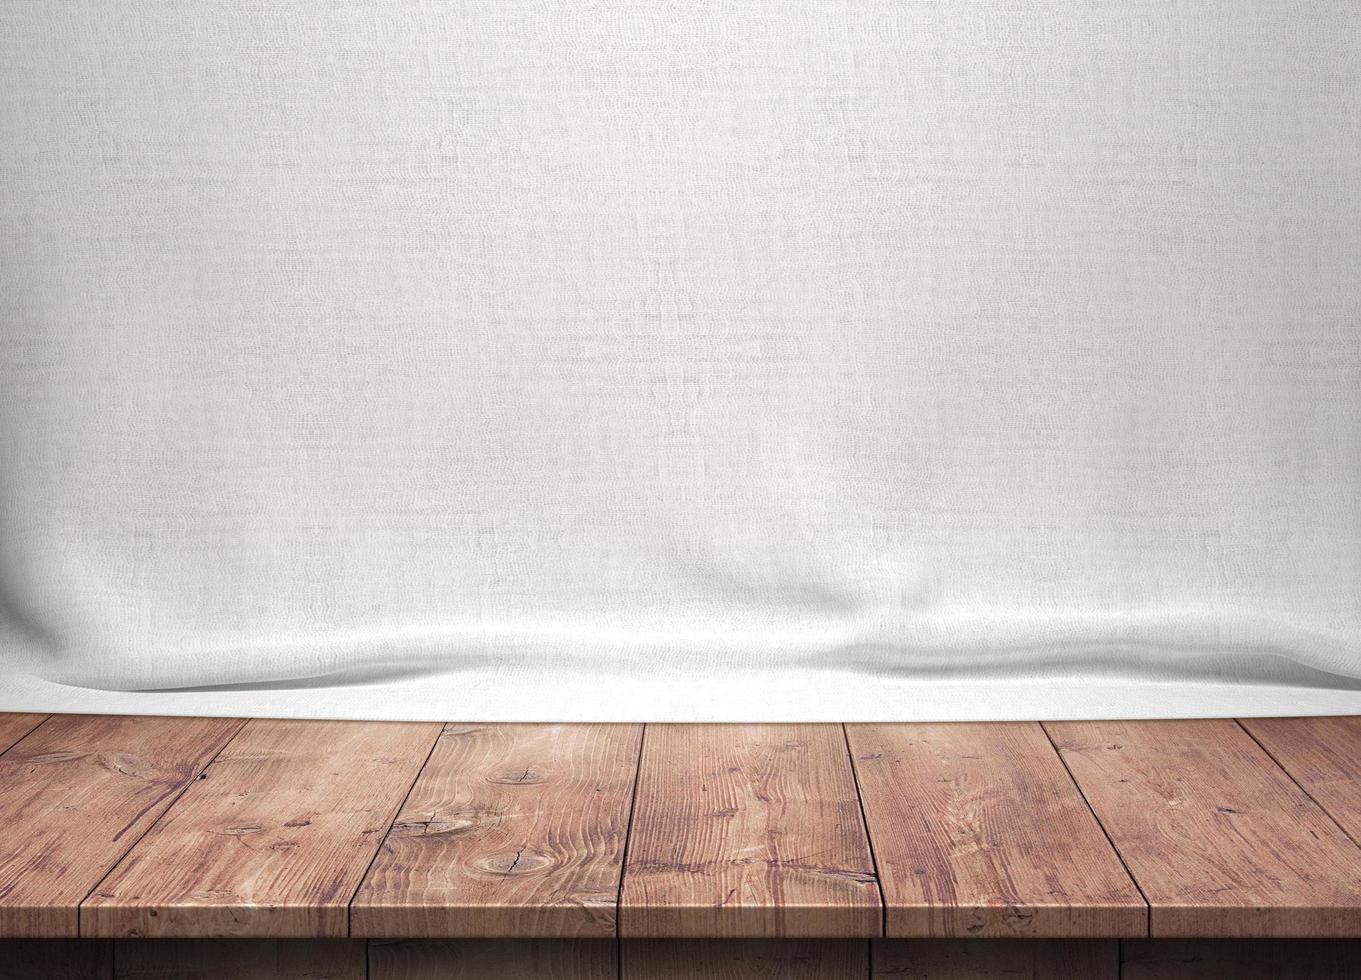 Wood table with white cotton fabric background photo